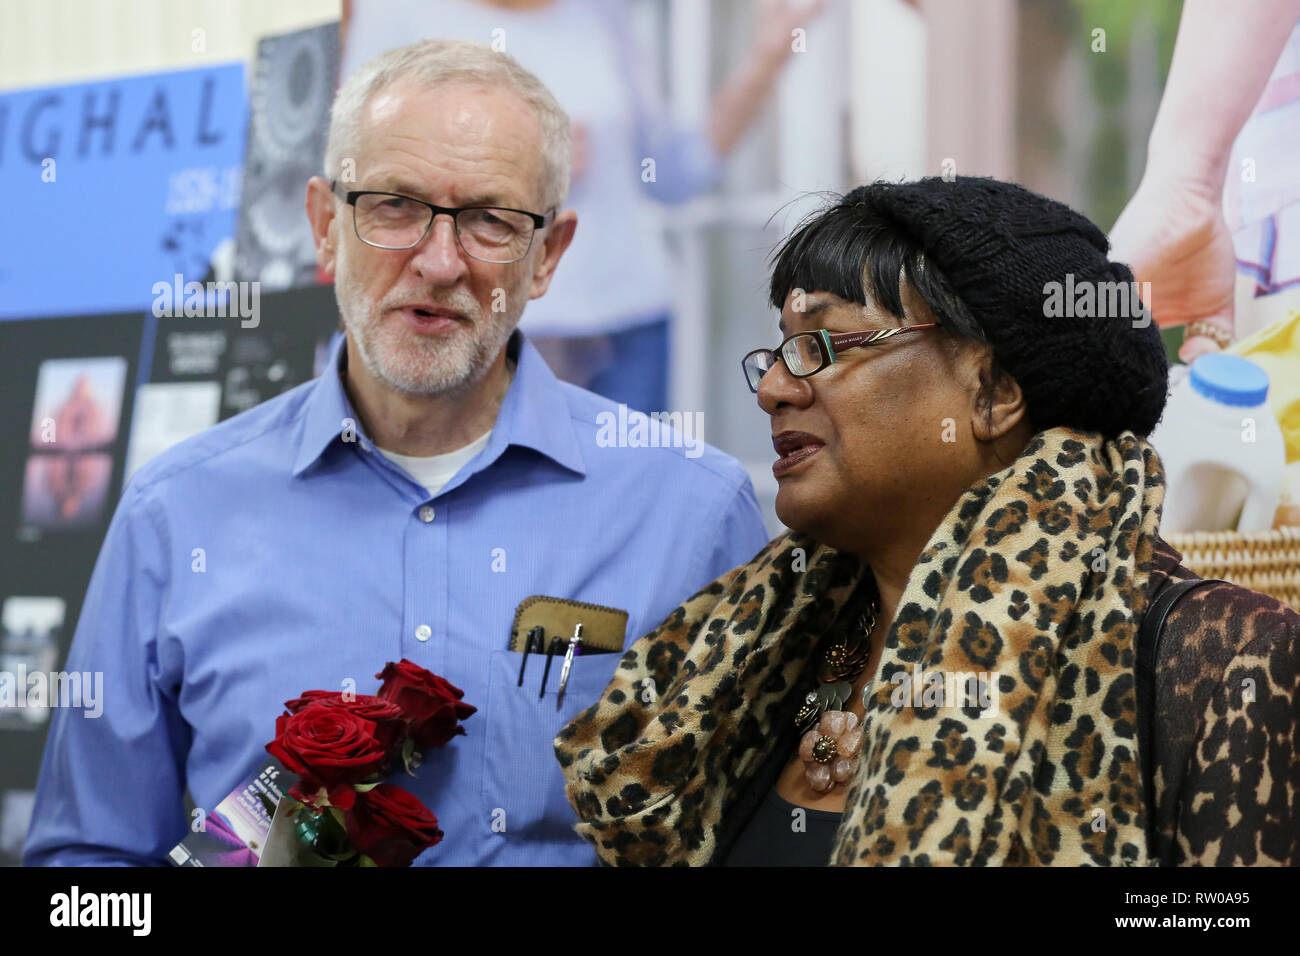 Labour leader Jeremy Corbyn and Diane Abbott, Shadow Home Secretary are seen during the fourth Visit My Mosque Day at Finsbury Park Mosque in North London. Over 250 mosques open their doors to non-Muslim guests and visitors on the fourth Visit My Mosque Day. This year the national event also encourages mosques to support Keep Britain Tidy's Great British Spring Clean campaign with many already taking part in cleaning their communities. Later a man thought to be a pro-Brexit campaigner was arrested after he pressed down an egg on Jeremy Corbyn’s head. Stock Photo